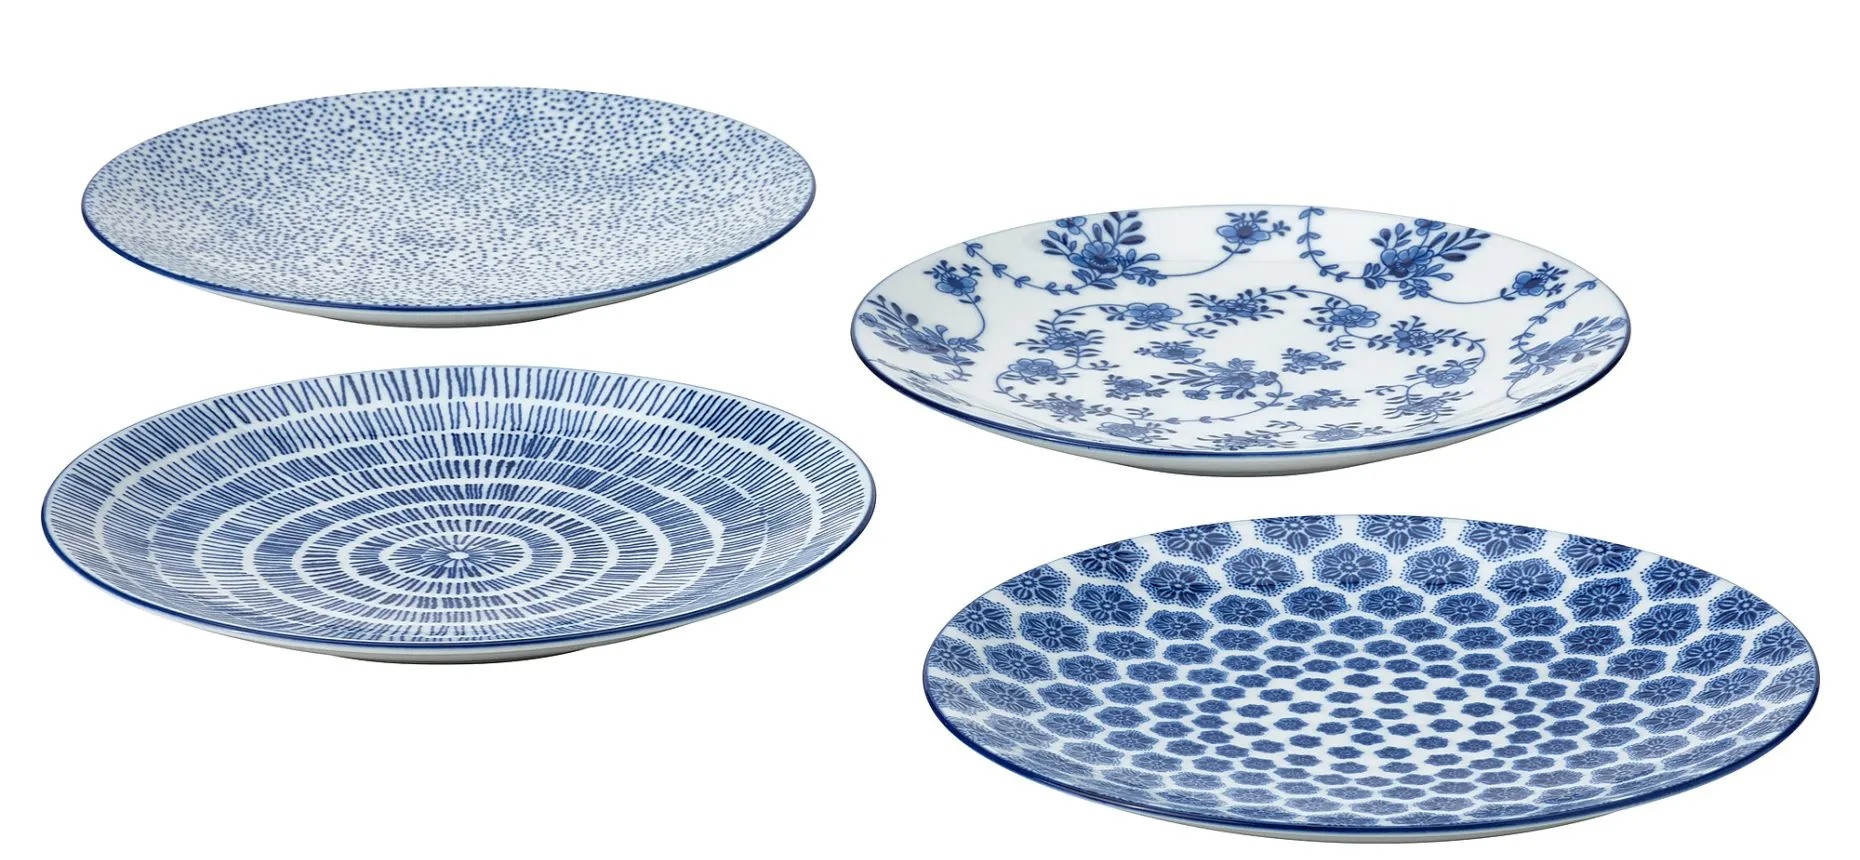 These Entusiasm side plates are £13 at Ikea